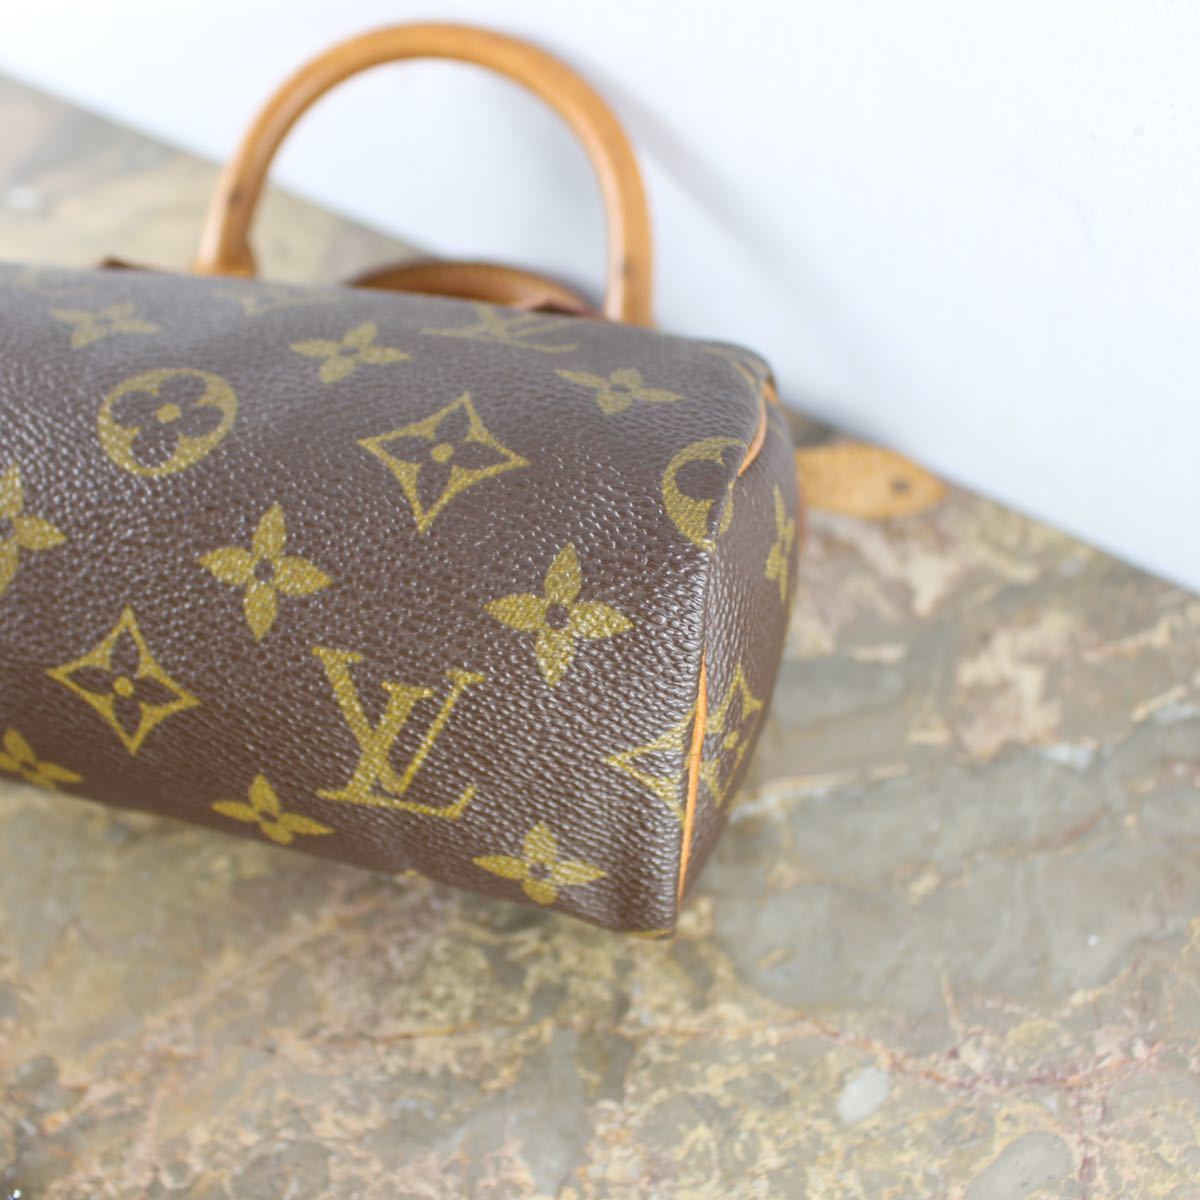 LOUIS VUITTON MONOGRAM PATTERNED M41534 TH1901 MINI SPEEDY 2WAY SHOULDER BAGルイヴィトンミニスピーディモノグラムショルダーバッグ